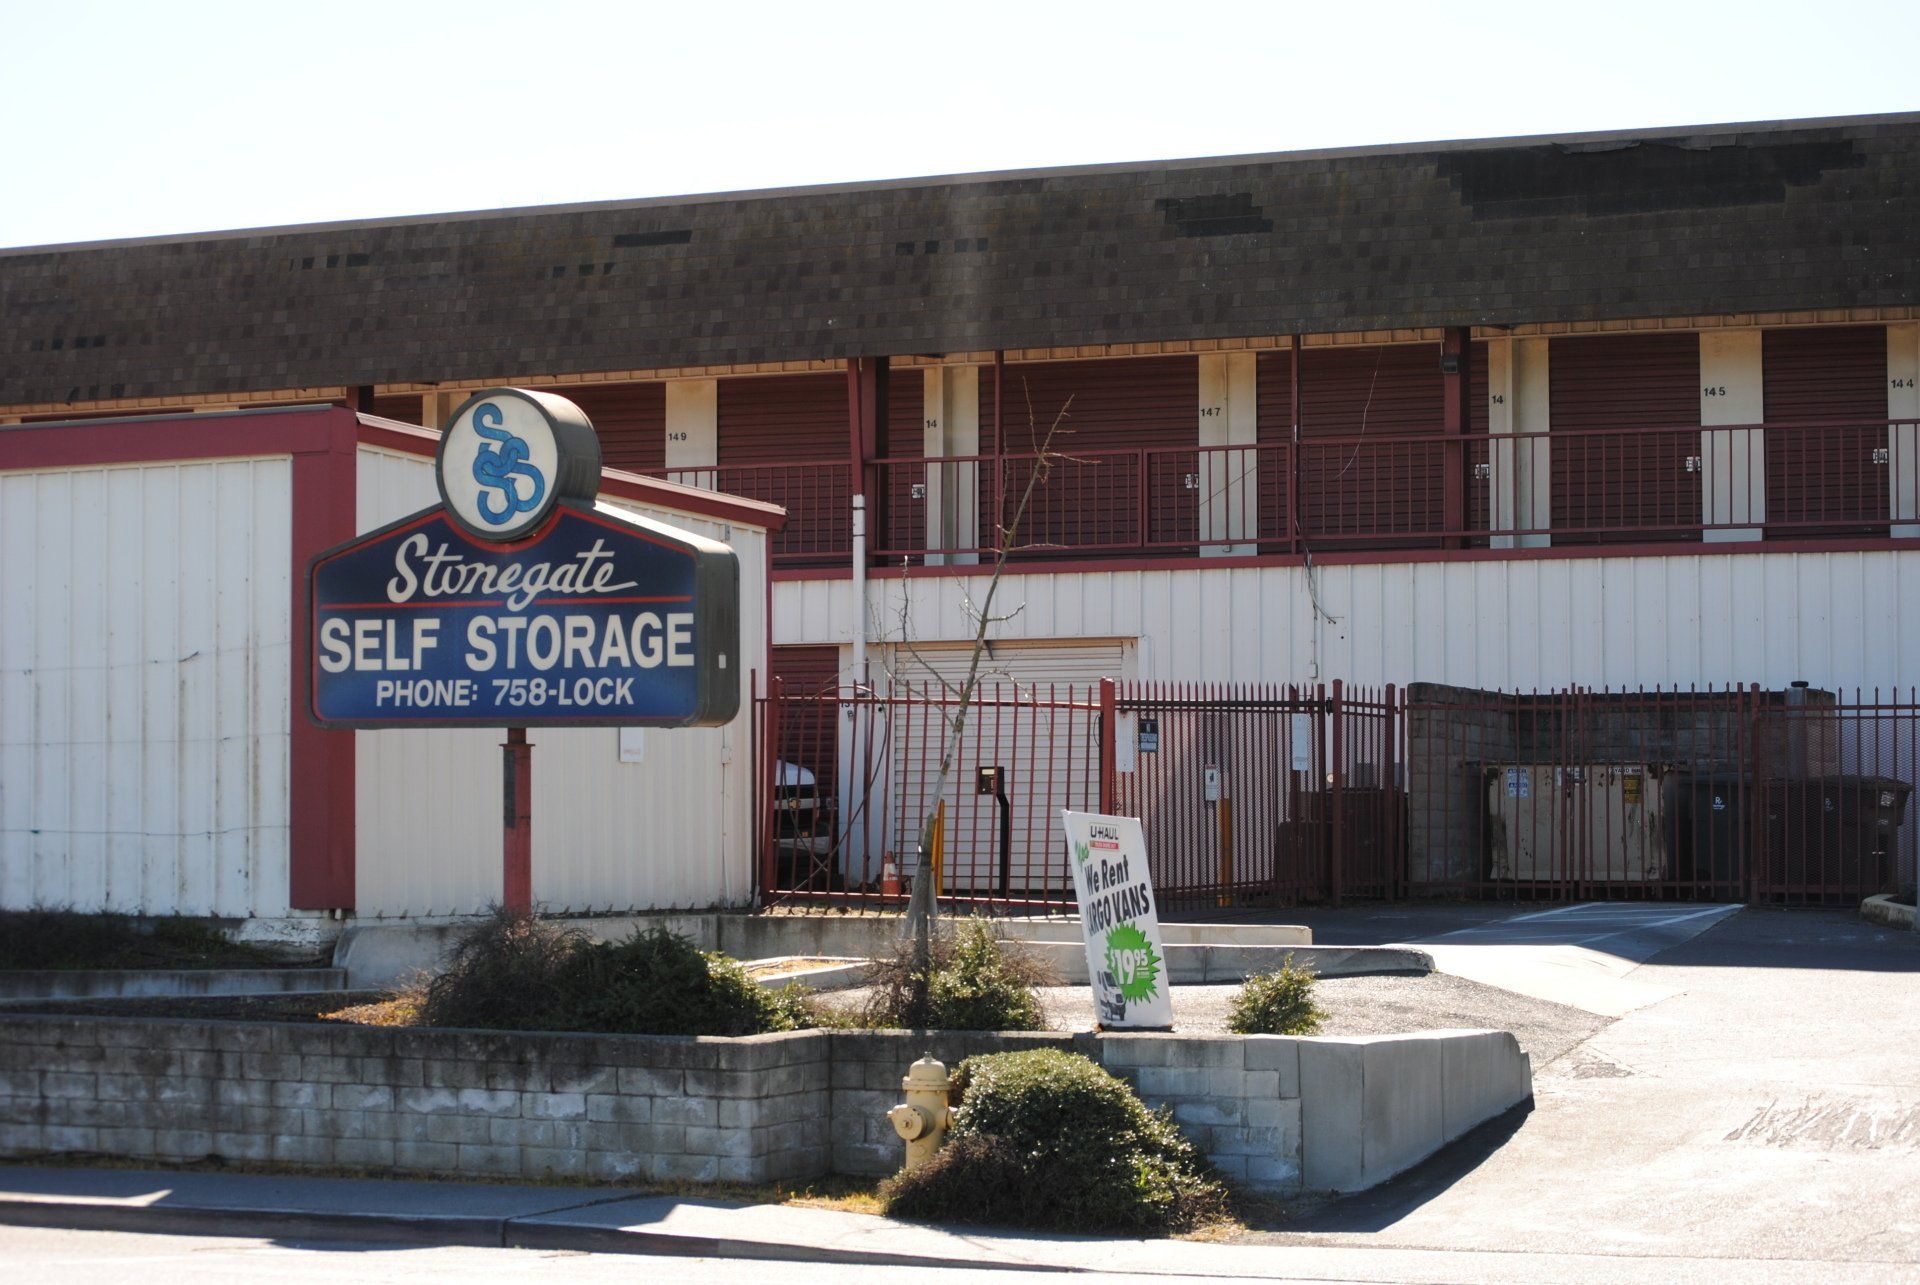 Stonegate Self Storage sign with storage units behind gate.